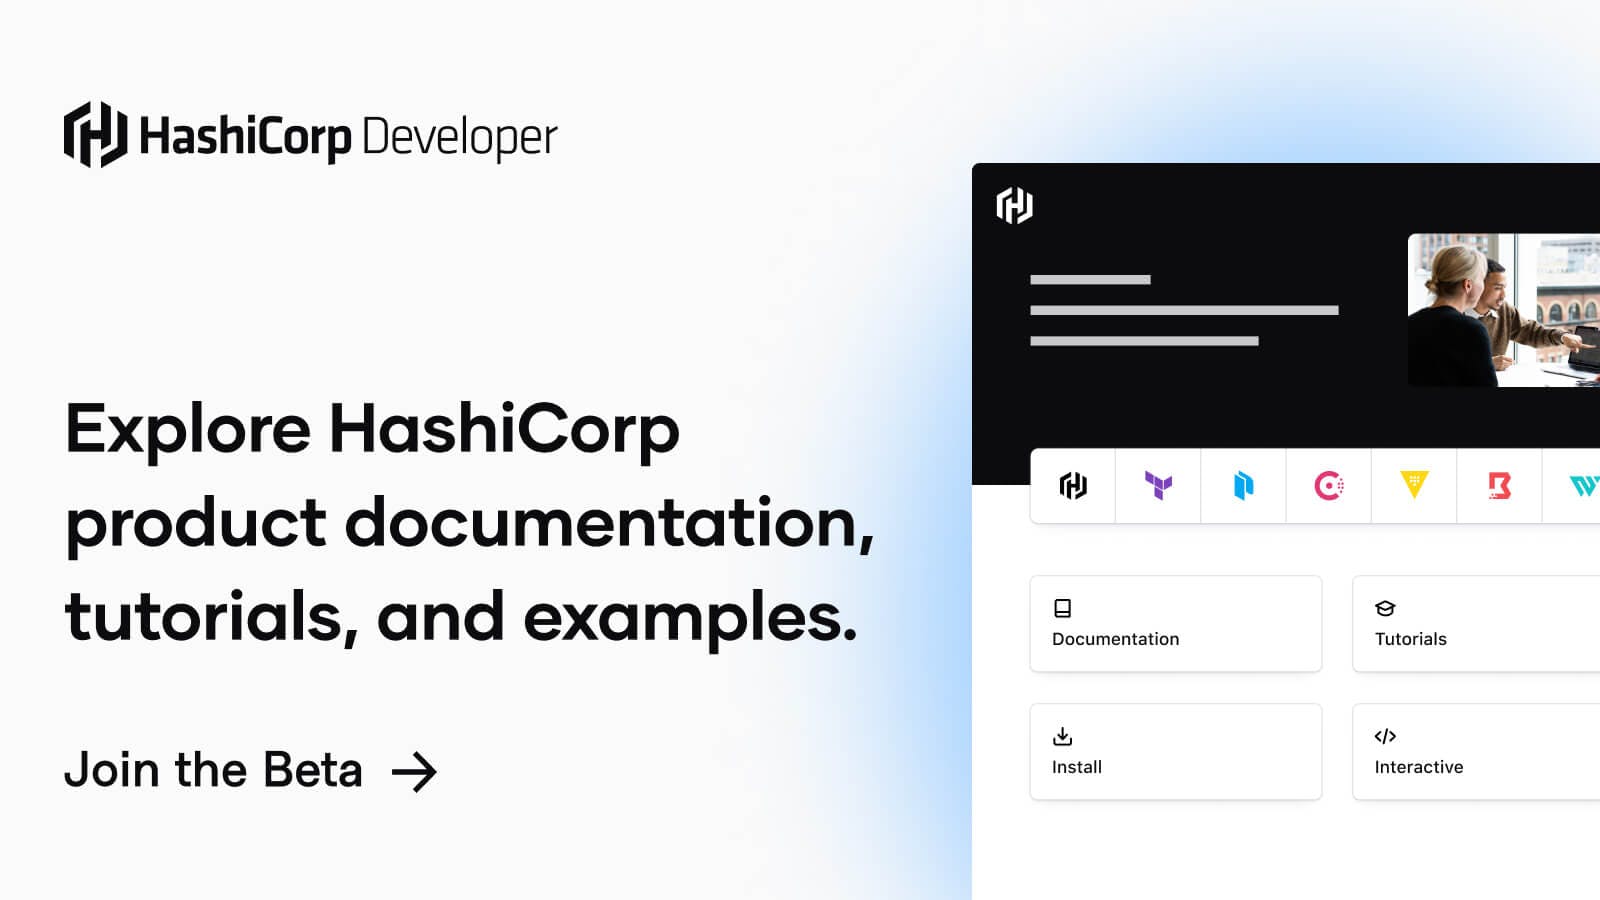 New HashiCorp Developer Site is Now in Public Beta